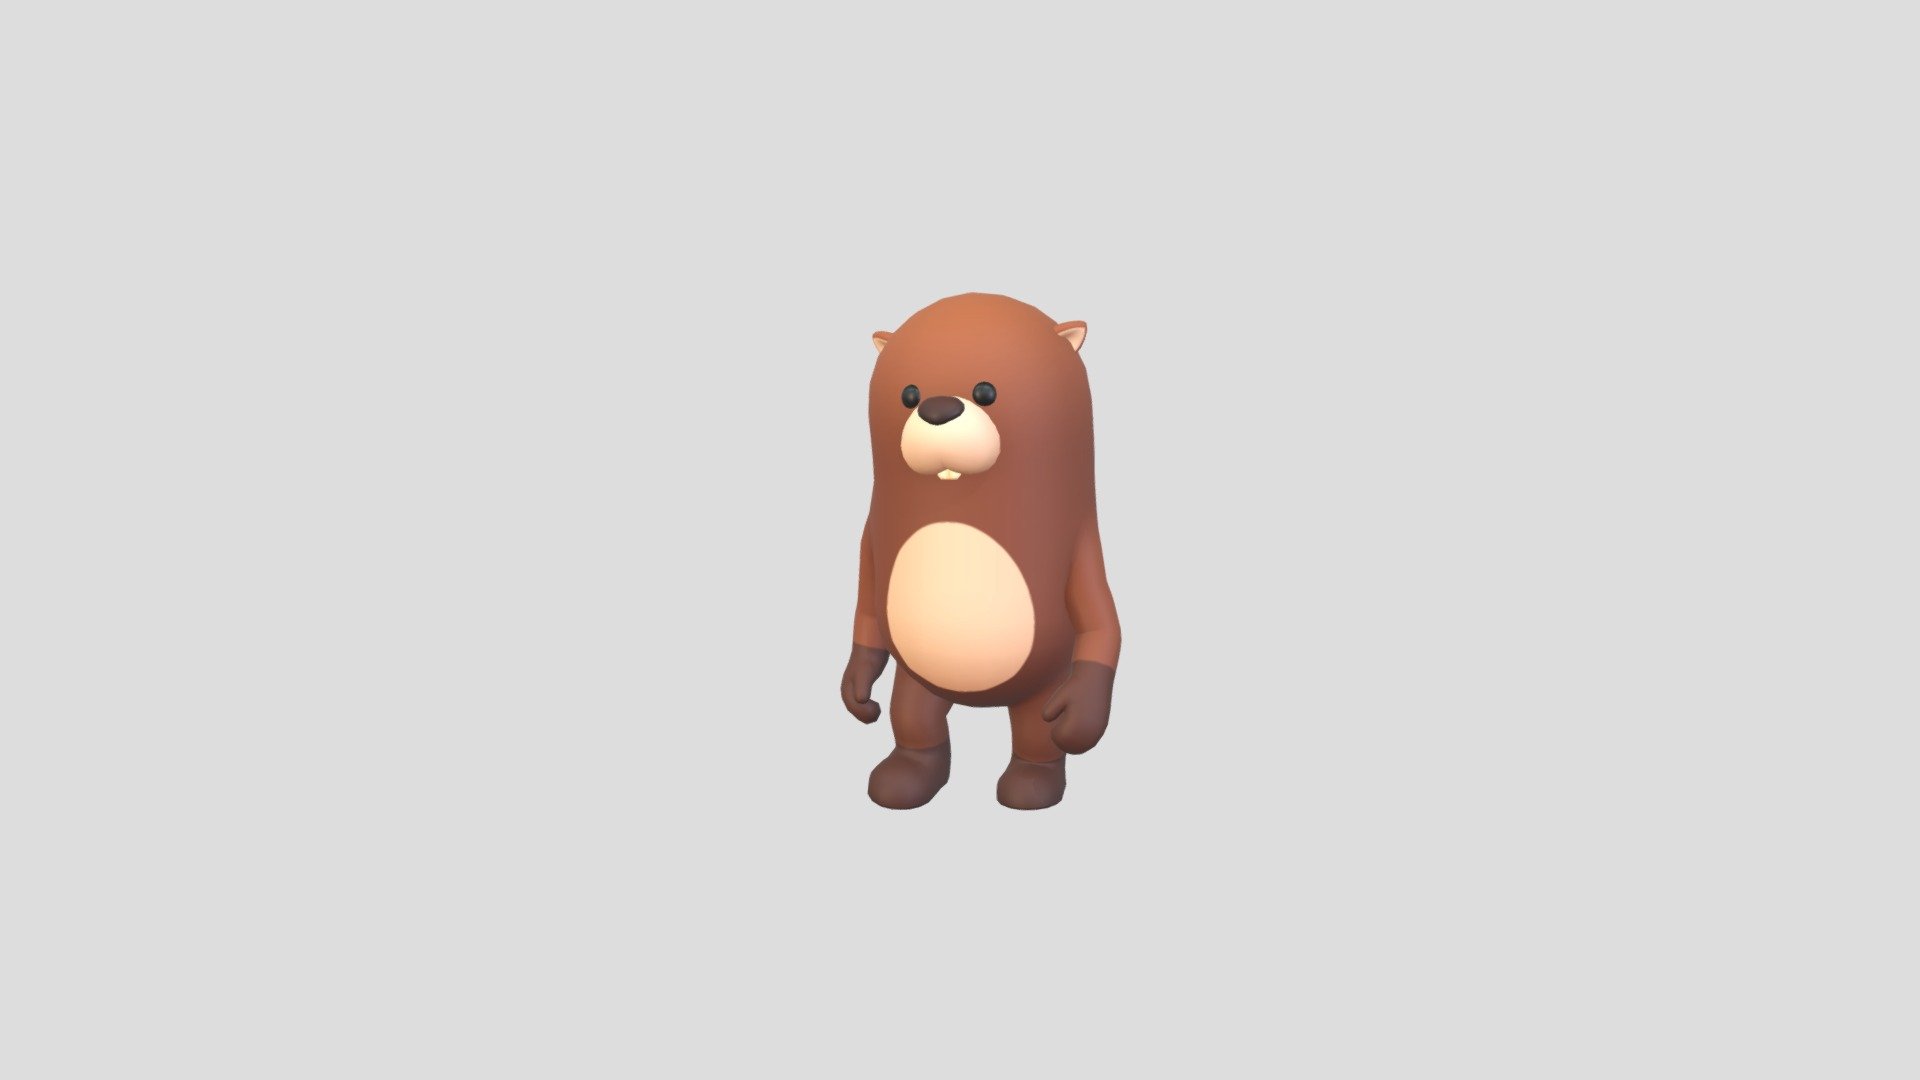 Rigged Beaver Character 3d model.      
    


File Formats      
 
- 3ds max 2023 (Rigged With CAT)  
 
- FBX  (Rigged) 
 
- OBJ  (NoRig) 
    


Clean topology    

Body Rigged  

No Facial Rig  or Blendshapes 

No Animations  

Non-overlapping unwrapped UVs        
 


PNG texture               

2048x2048                


- Base Color                        

- Normal                            

- Roughness                         



2,122 polygons                          

2,204 vertexs                          
 - Rigged Beaver Character - Buy Royalty Free 3D model by bariacg 3d model